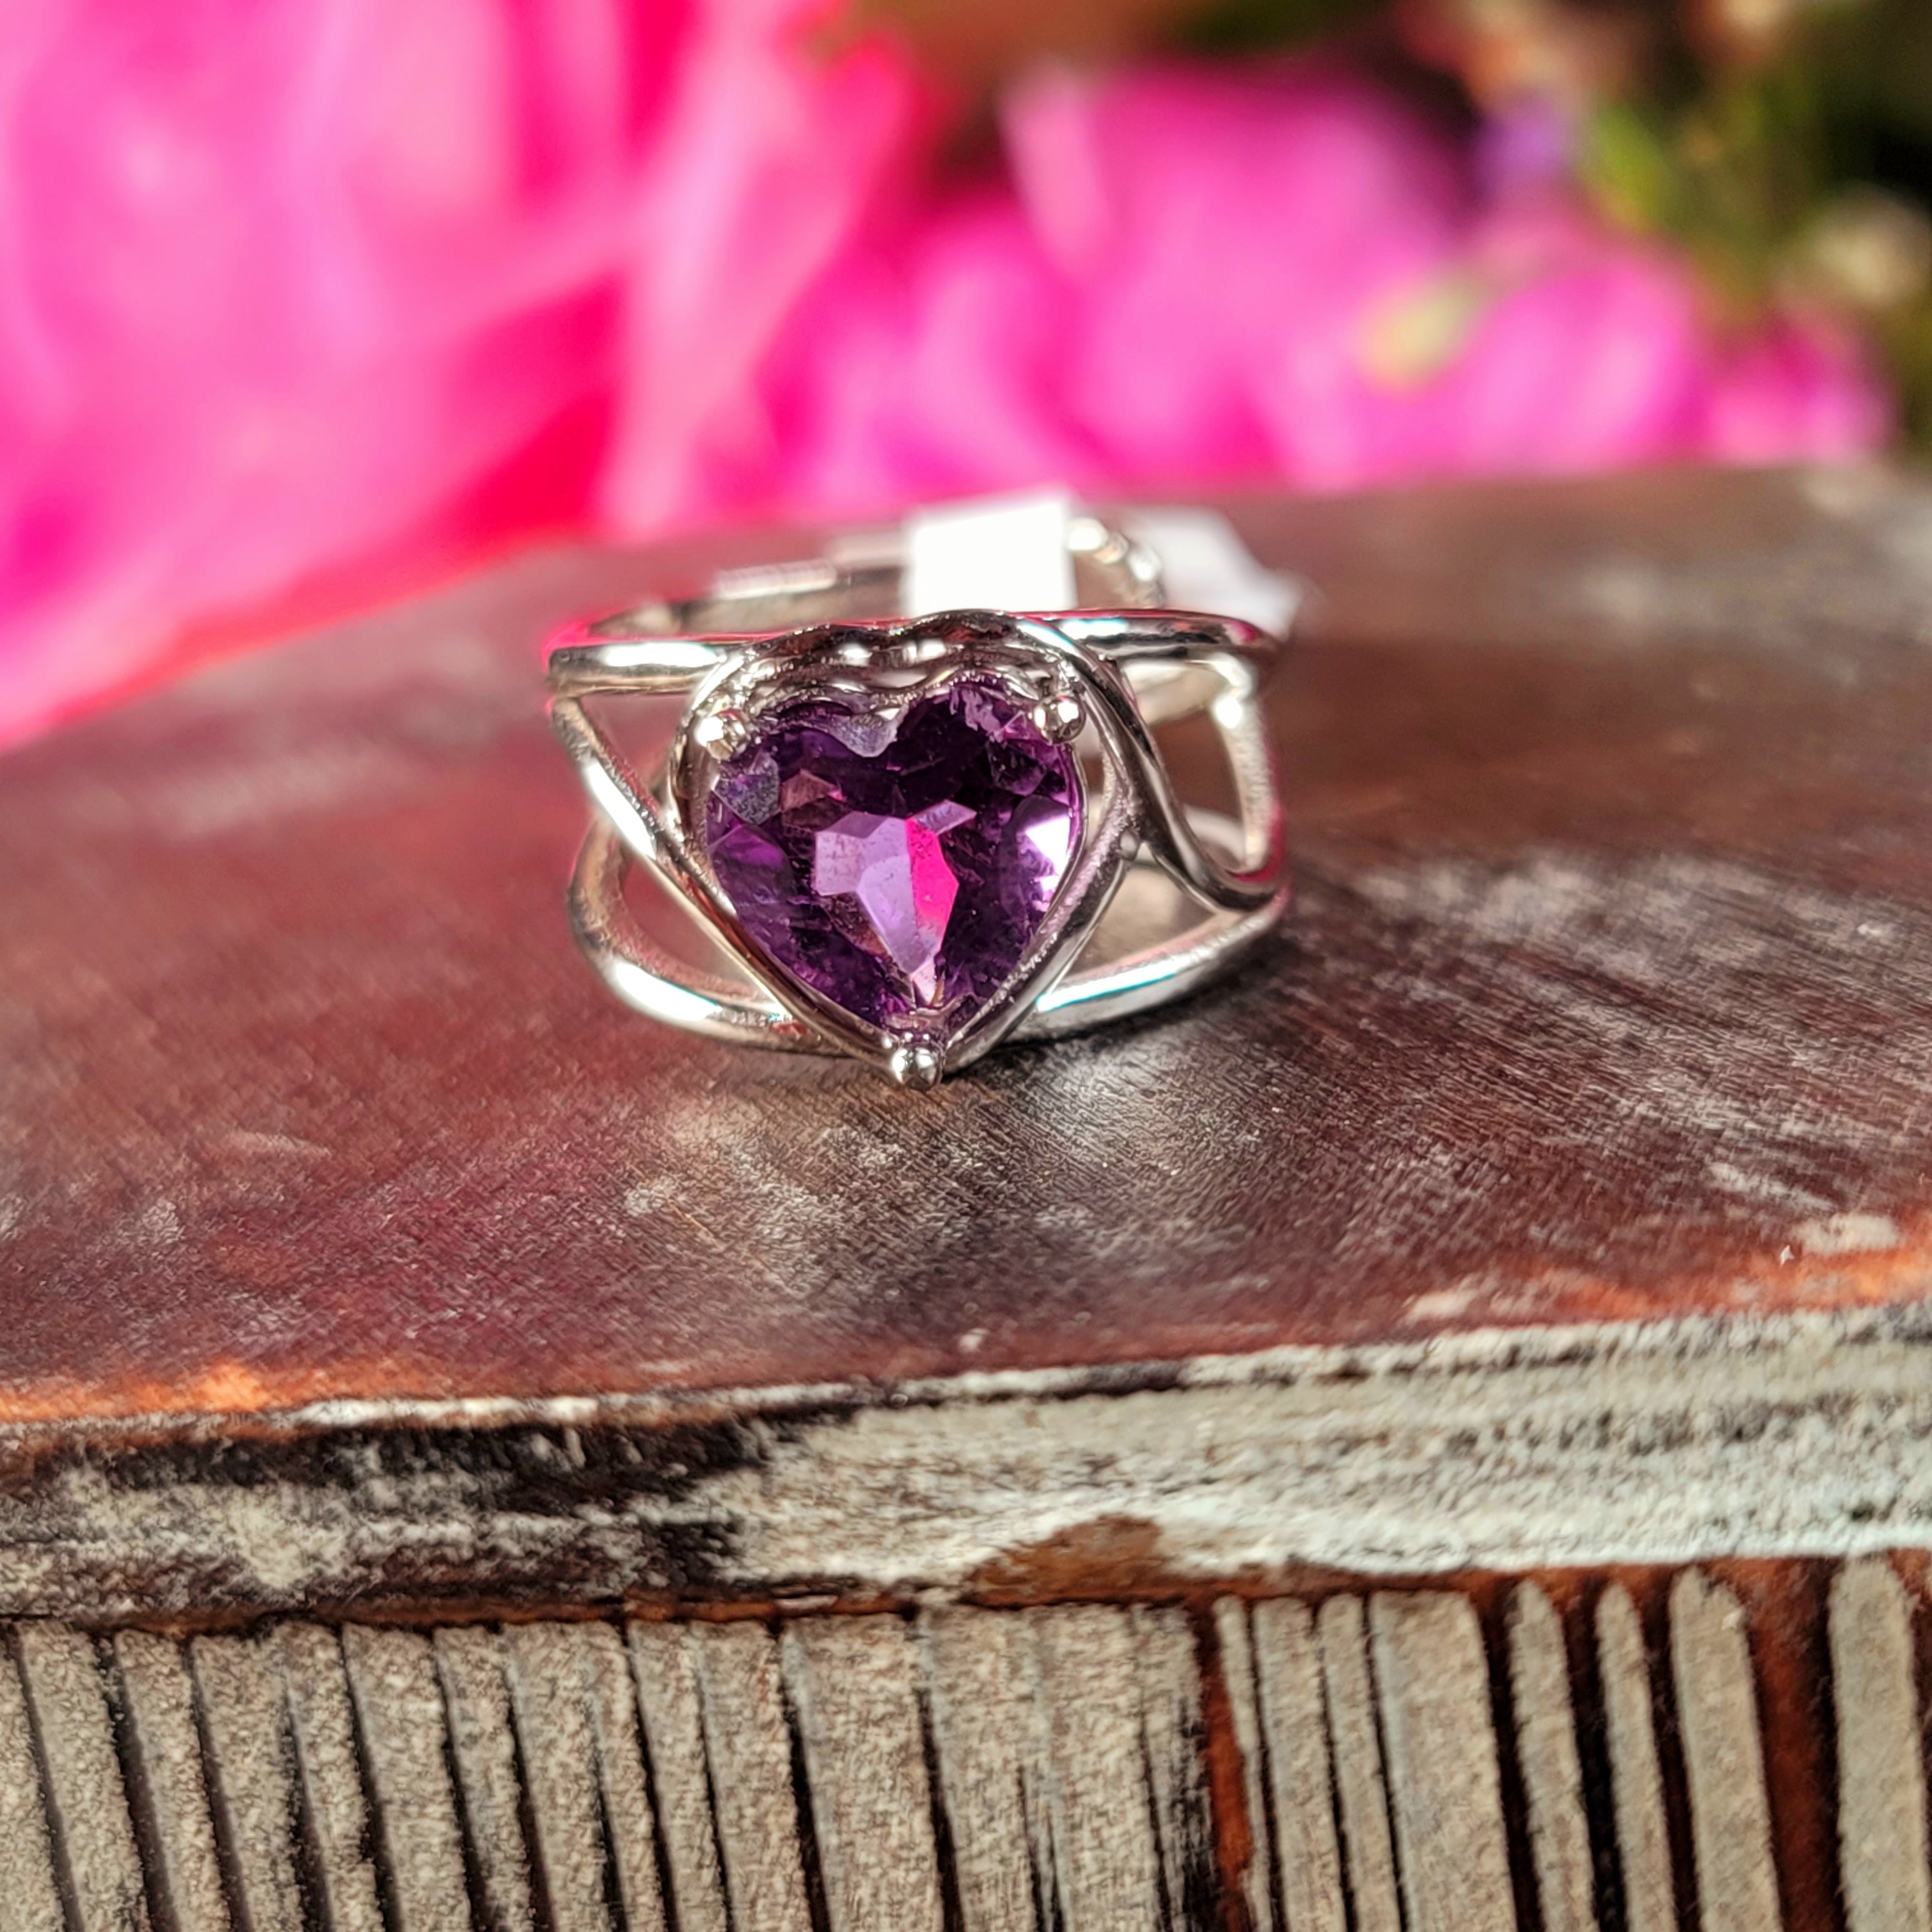 Amethyst Heart Finger Cuff Adjustable Ring .925 Silver for Enhancing your Intuitive Gifts